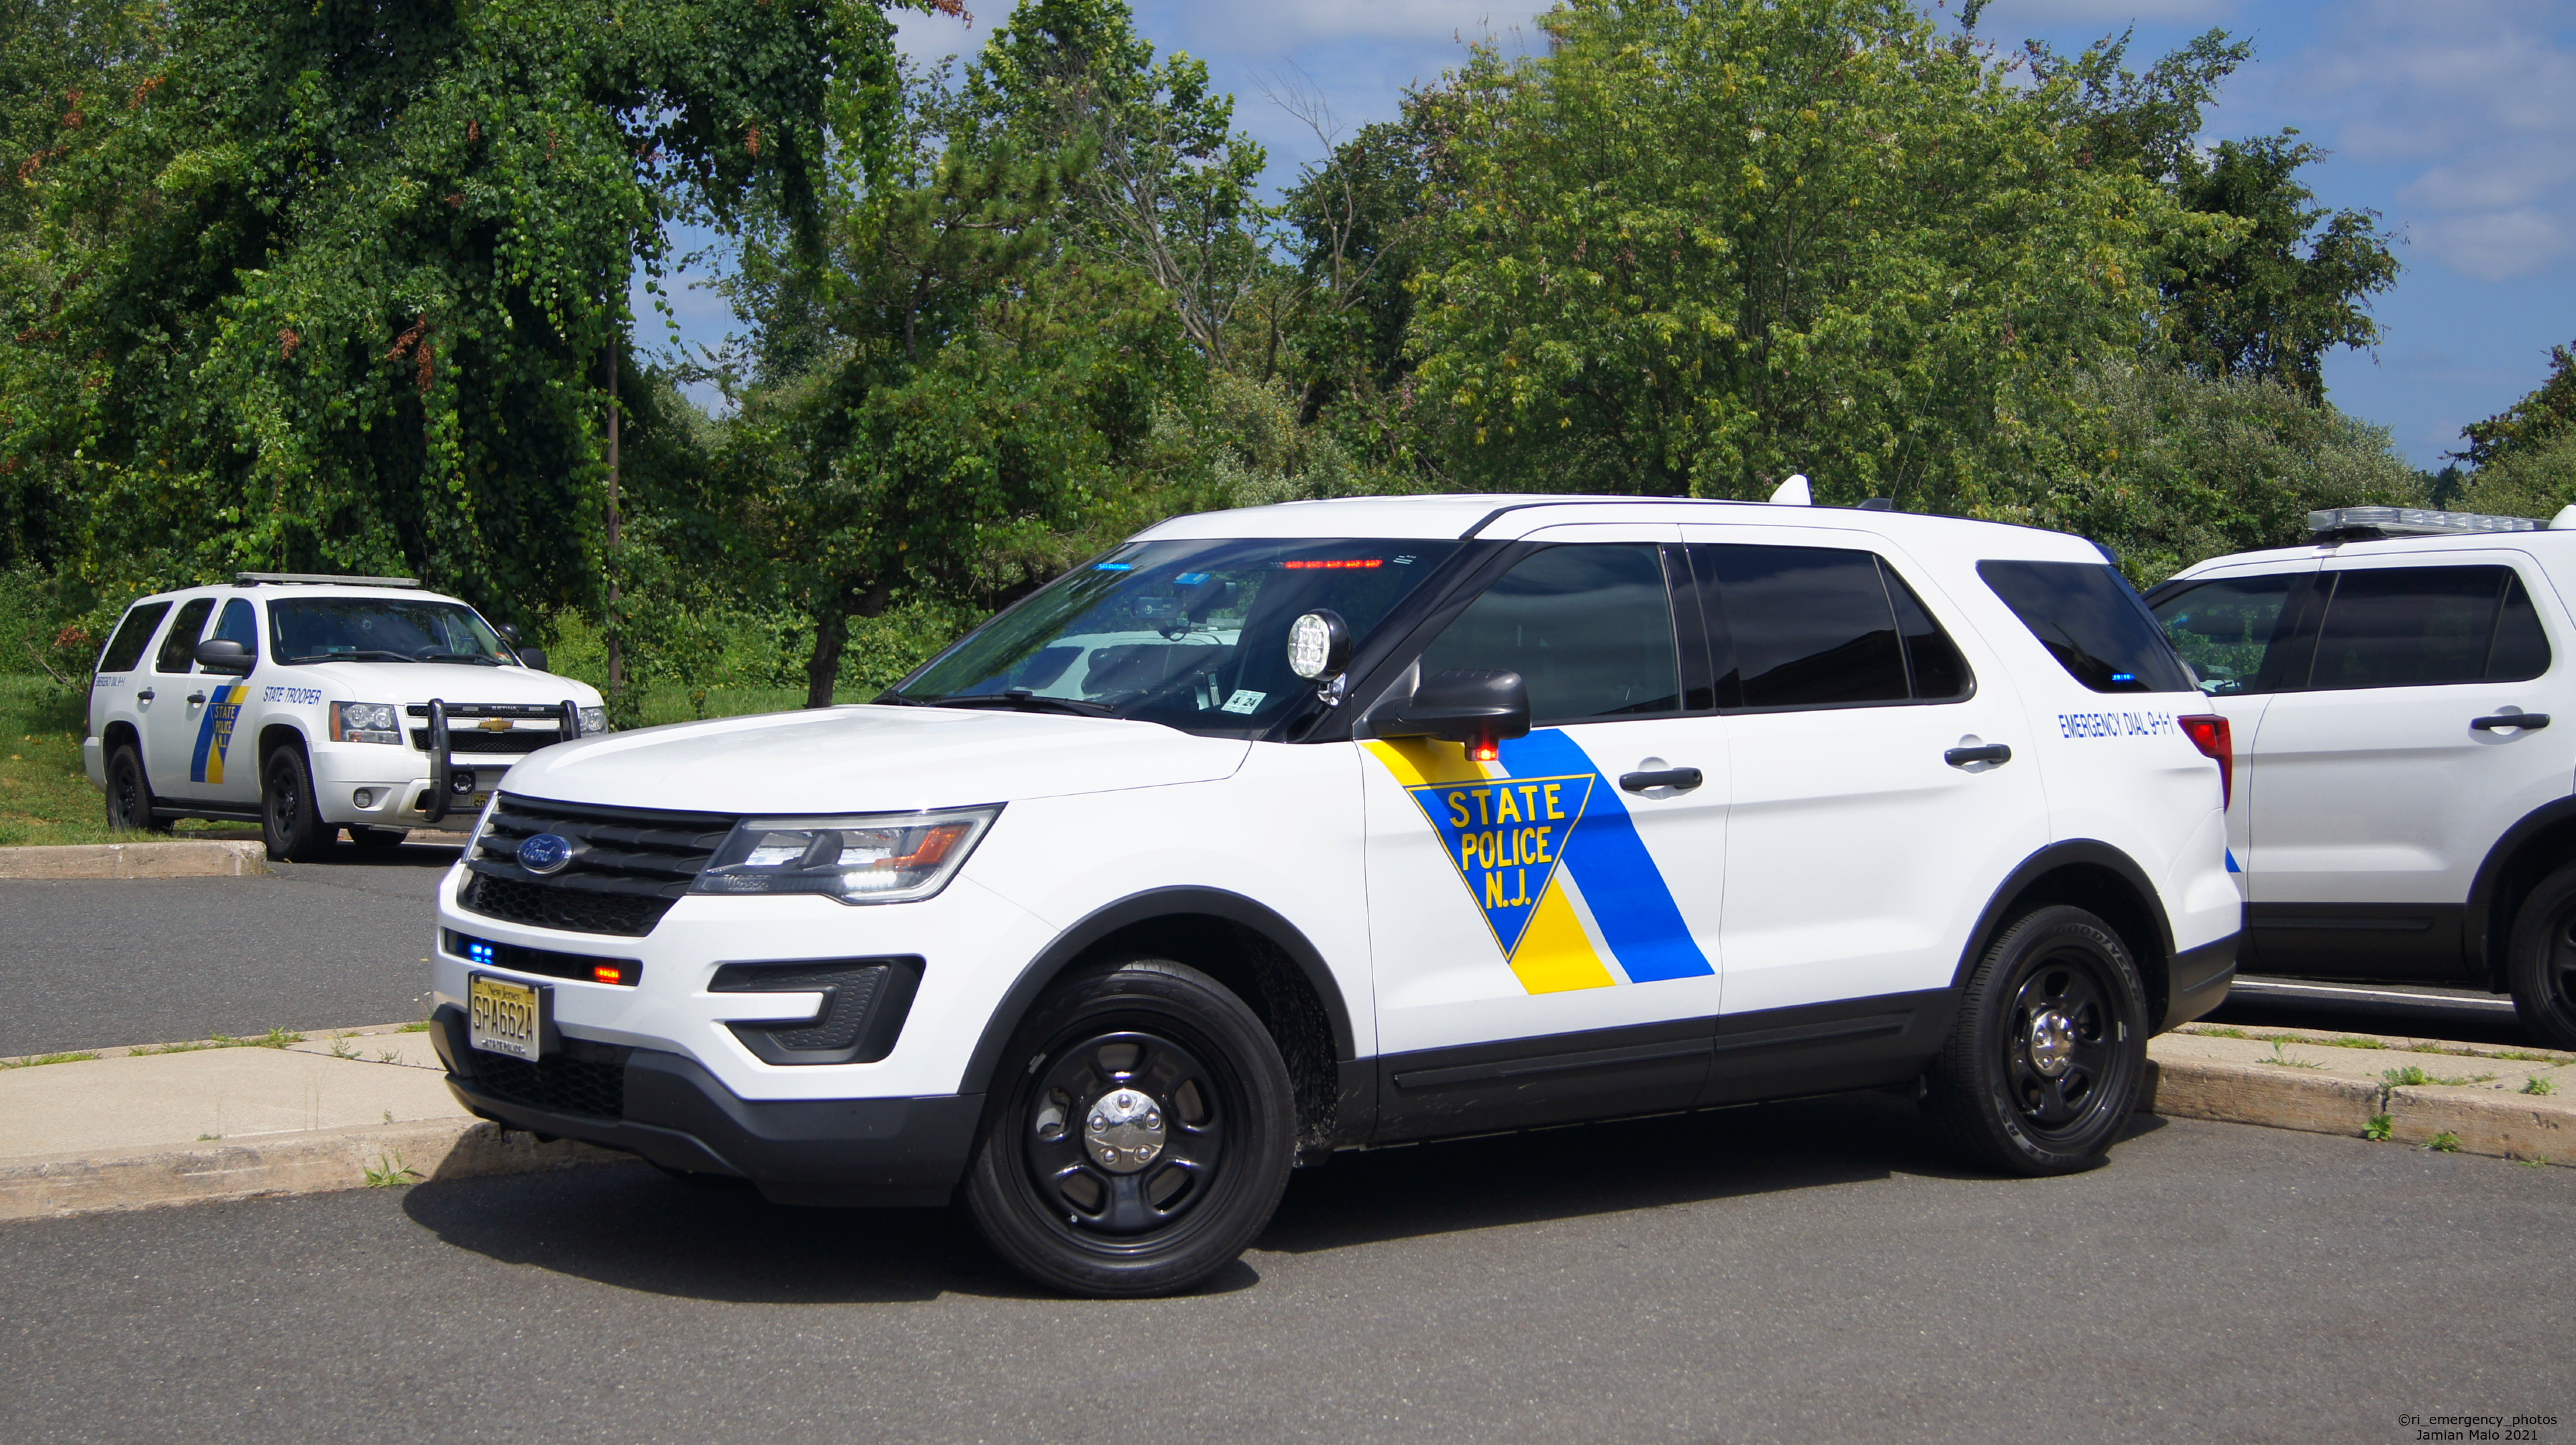 A photo  of New Jersey State Police
            Cruiser 662, a 2016-2019 Ford Police Interceptor Utility             taken by Jamian Malo